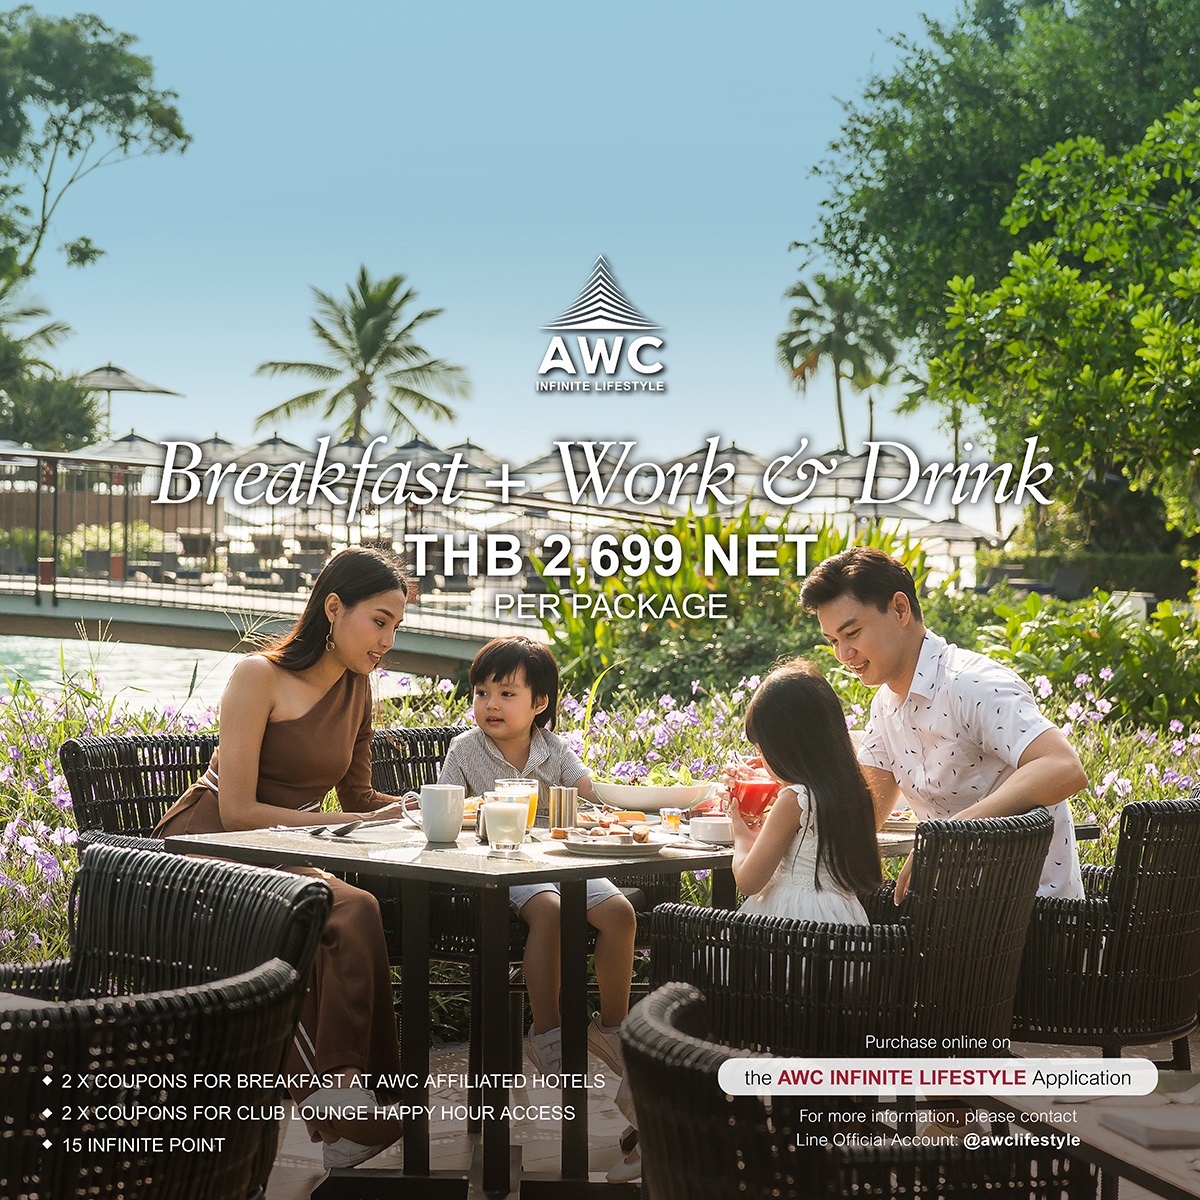 AWC launches exclusive Happy Hour Club Lounge Package offering 3 Packages for 3 Lifestyles for work and leisure from leading hotels and resorts across Thailand